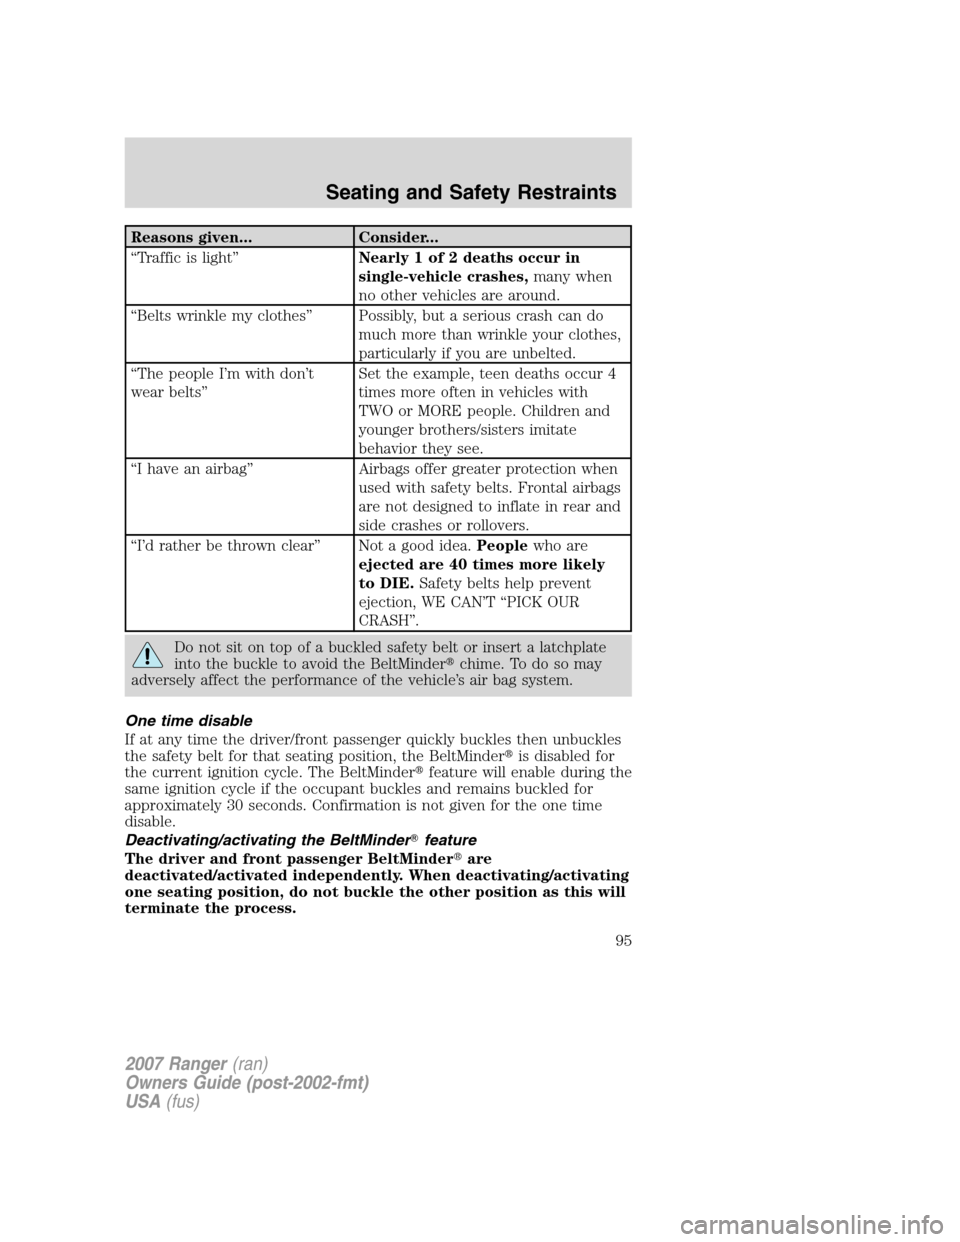 FORD RANGER 2007 2.G Owners Manual Reasons given... Consider...
“Traffic is light”Nearly 1 of 2 deaths occur in
single-vehicle crashes,many when
no other vehicles are around.
“Belts wrinkle my clothes” Possibly, but a serious c